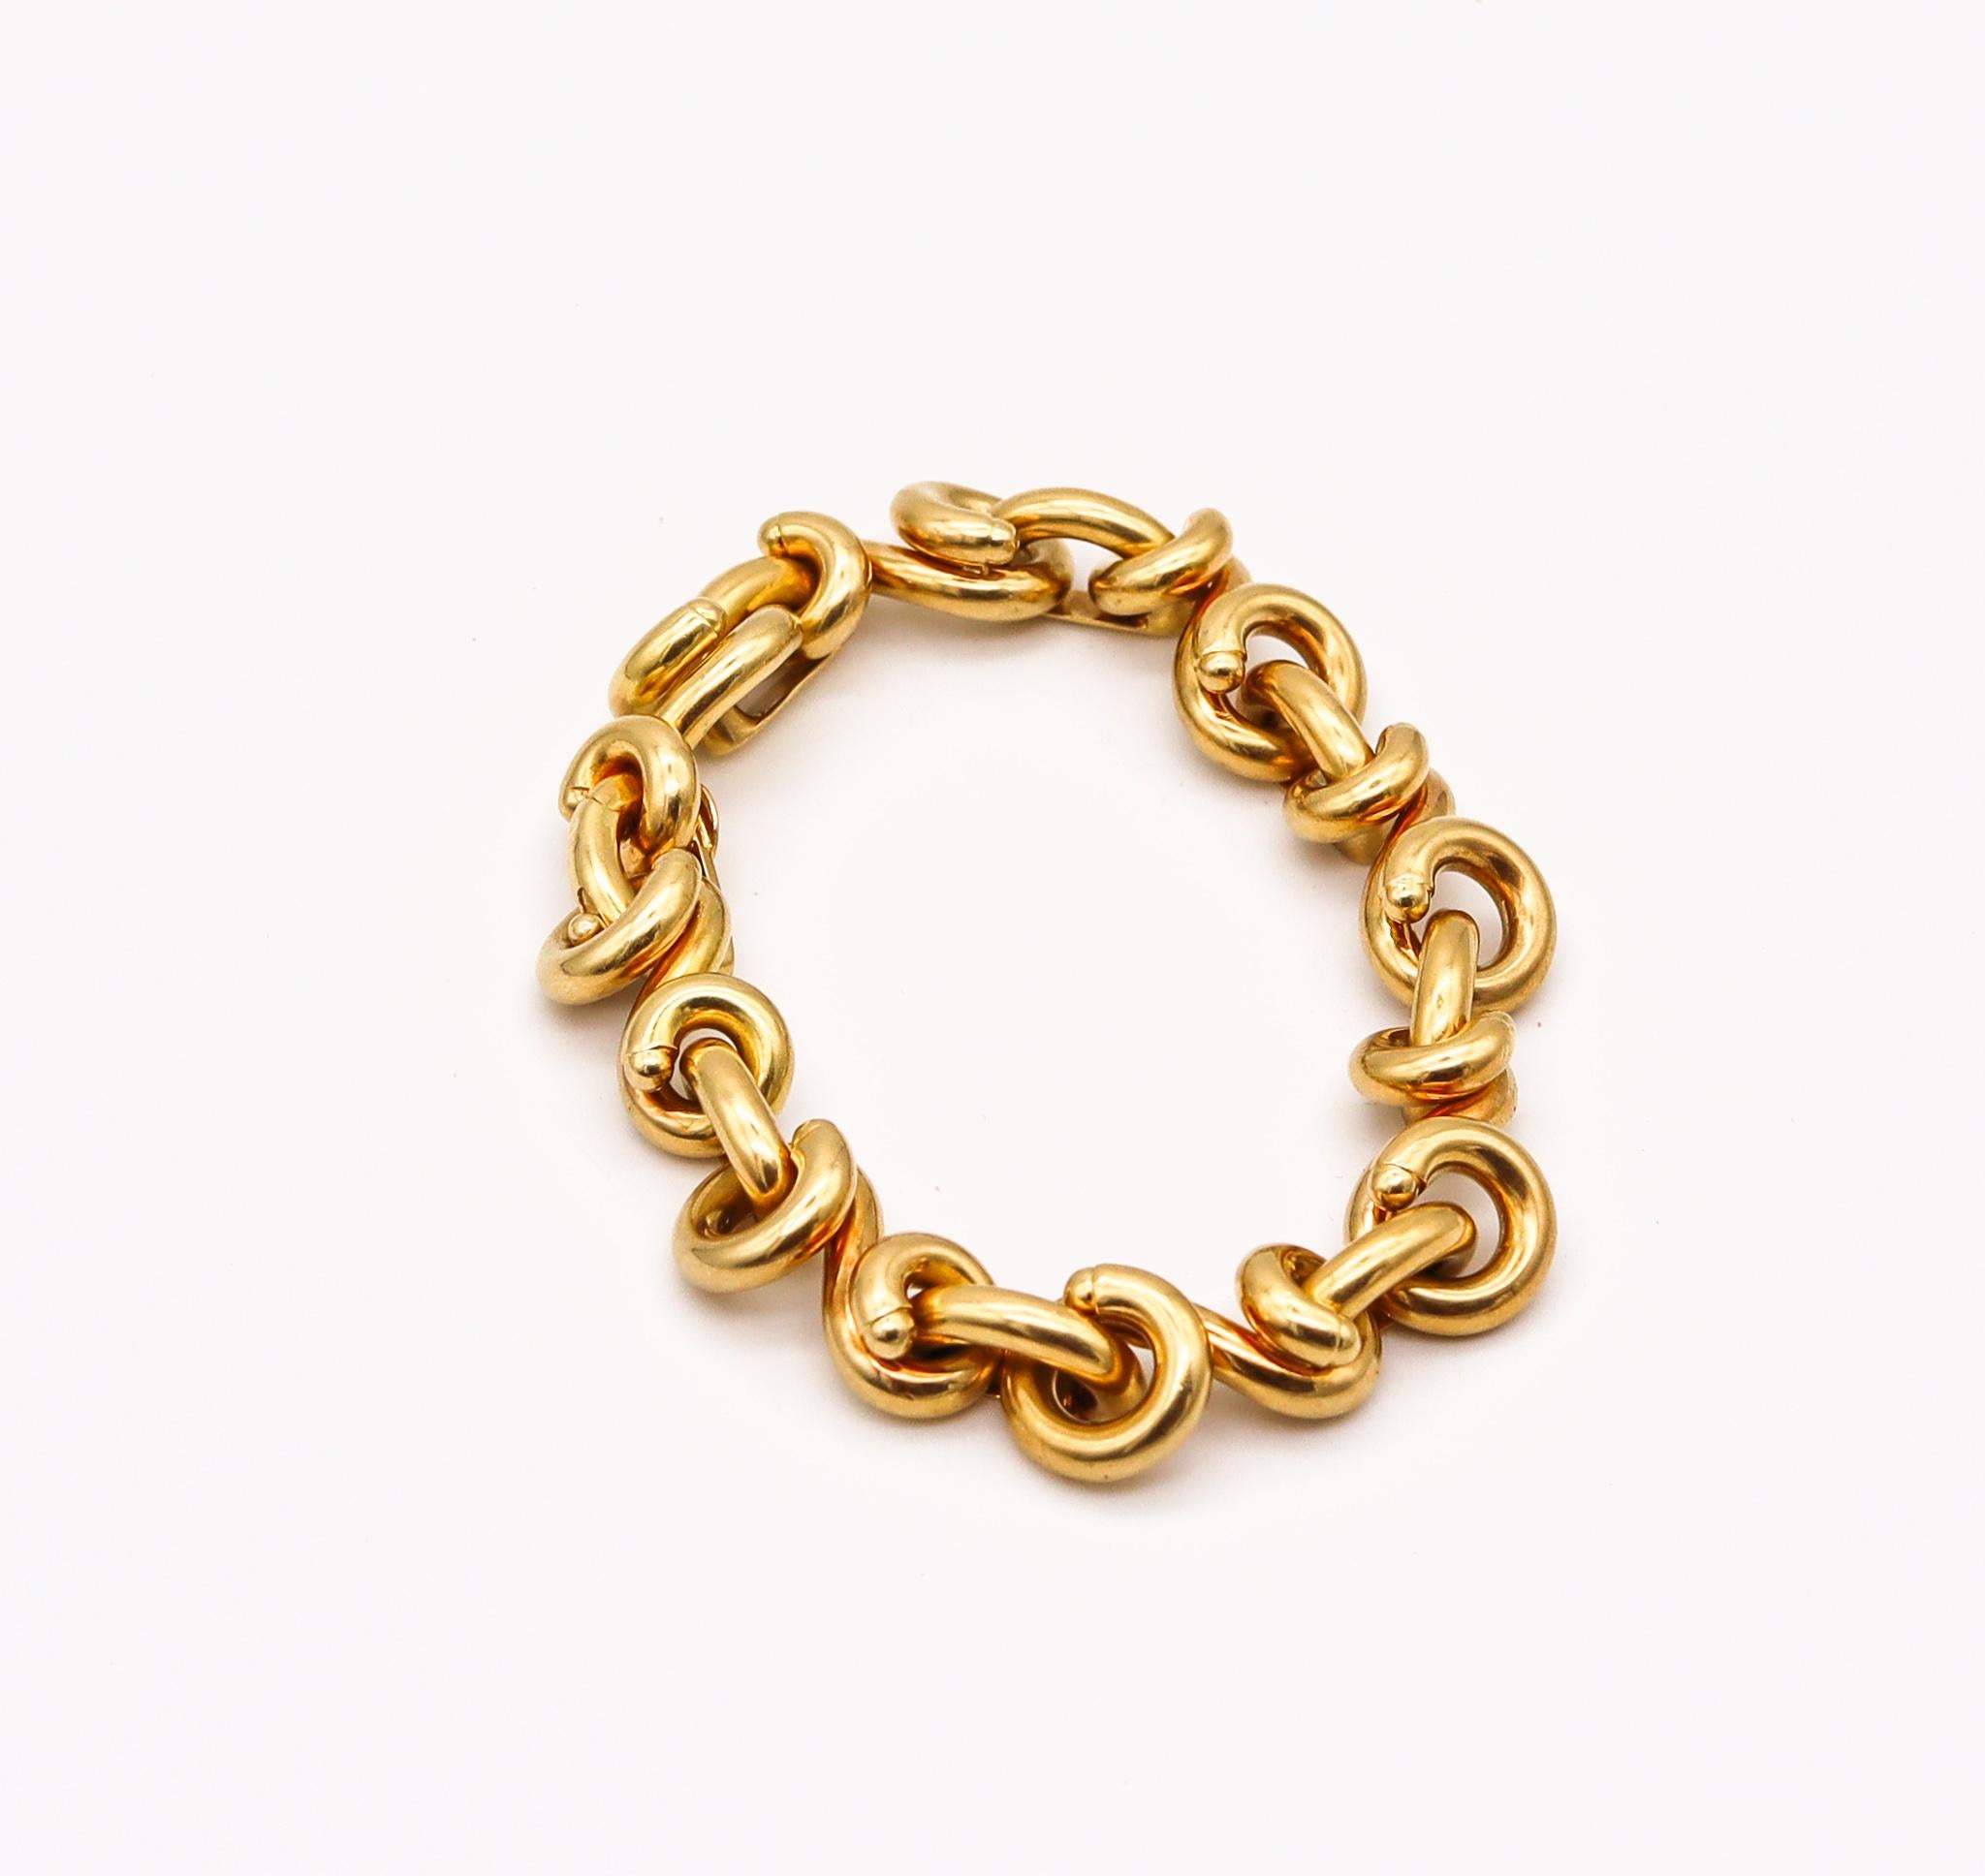 Twisted links bracelet designed by Van Cleef & Arpels.

Very rare bracelet created by the house of Van Cleef & Arpels in Paris, back in the 1970's. Composed by multiples intricate curved links crafted in solid yellow gold of 18 karats with high